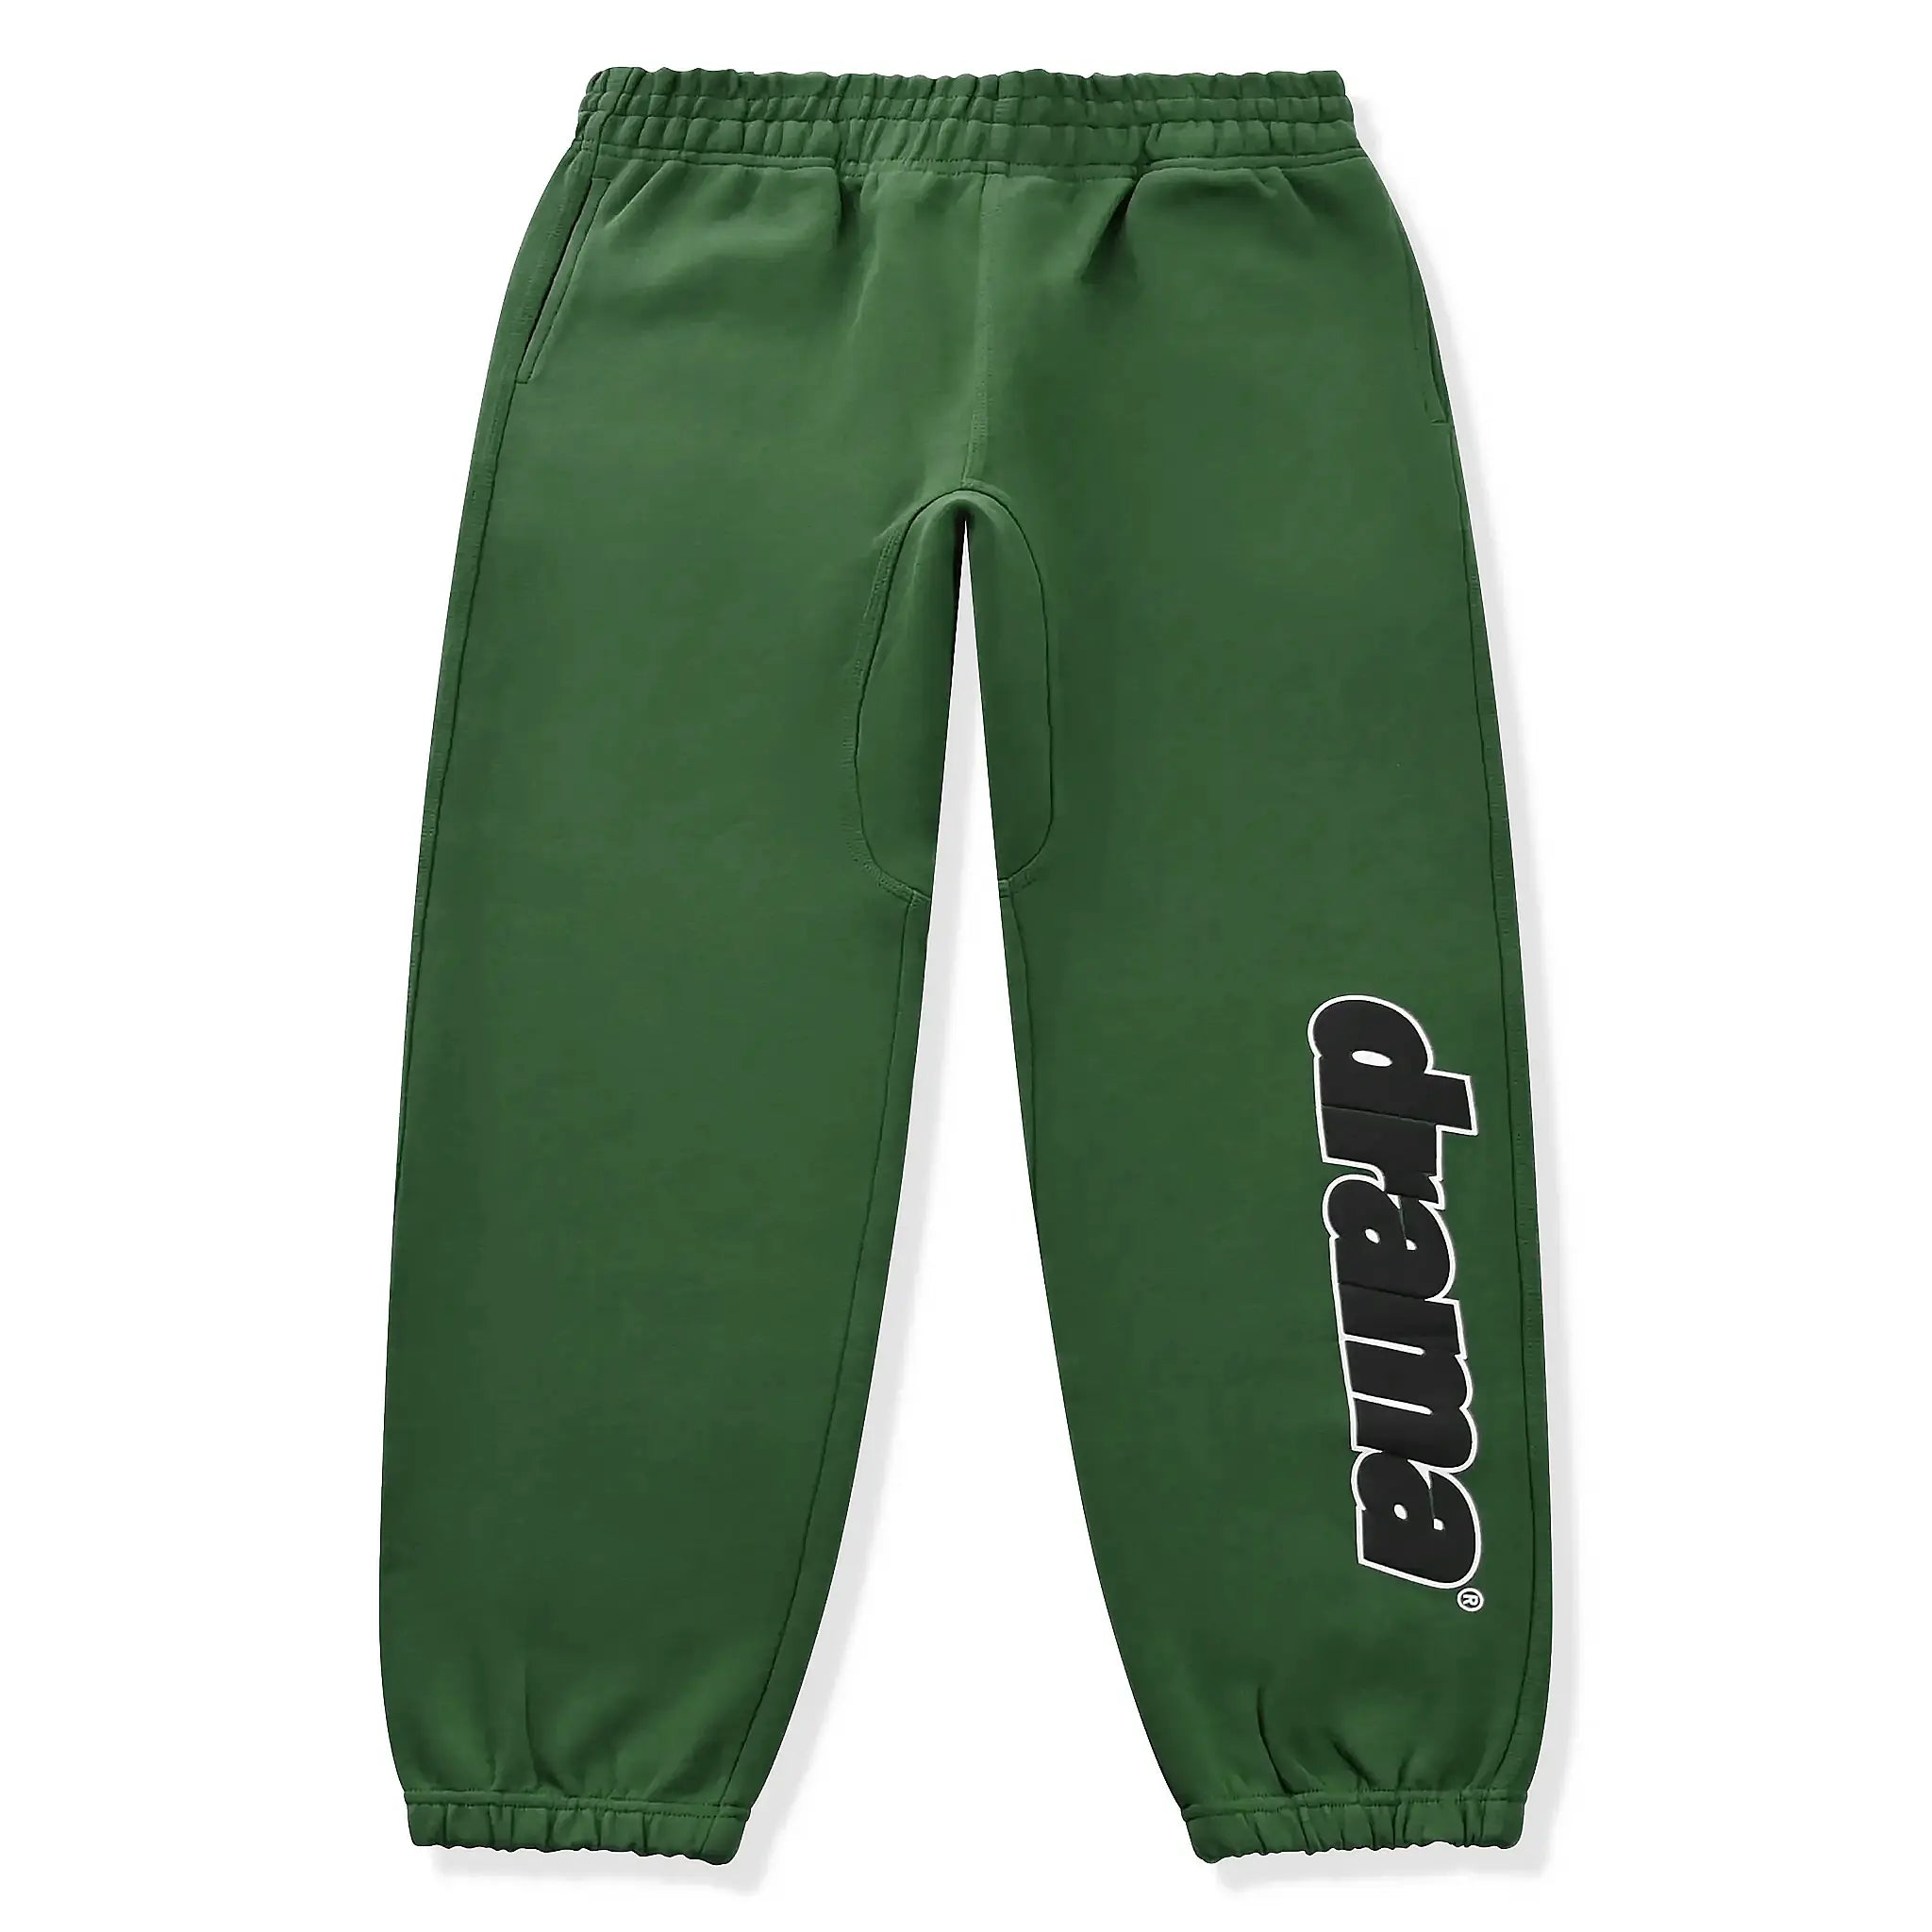 Front view of Drama Call Green Black Sweatpants